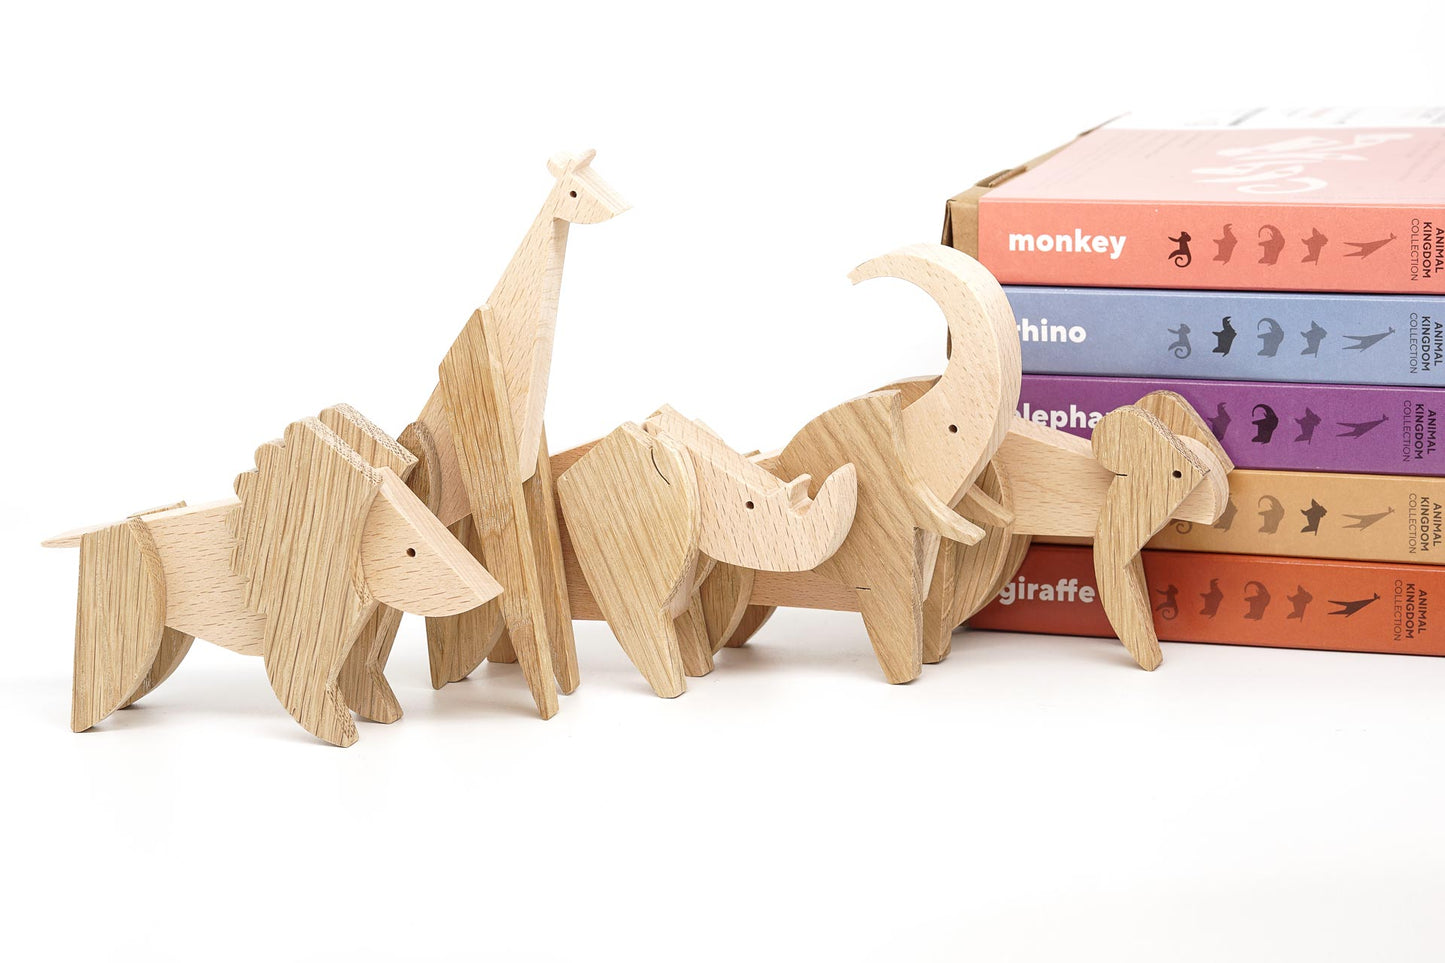 ESNAF magnetic wooden toy animals assembled from various shapes and forms- set of 5 with elephant, monkey, rhinoceros, lion and giraffe